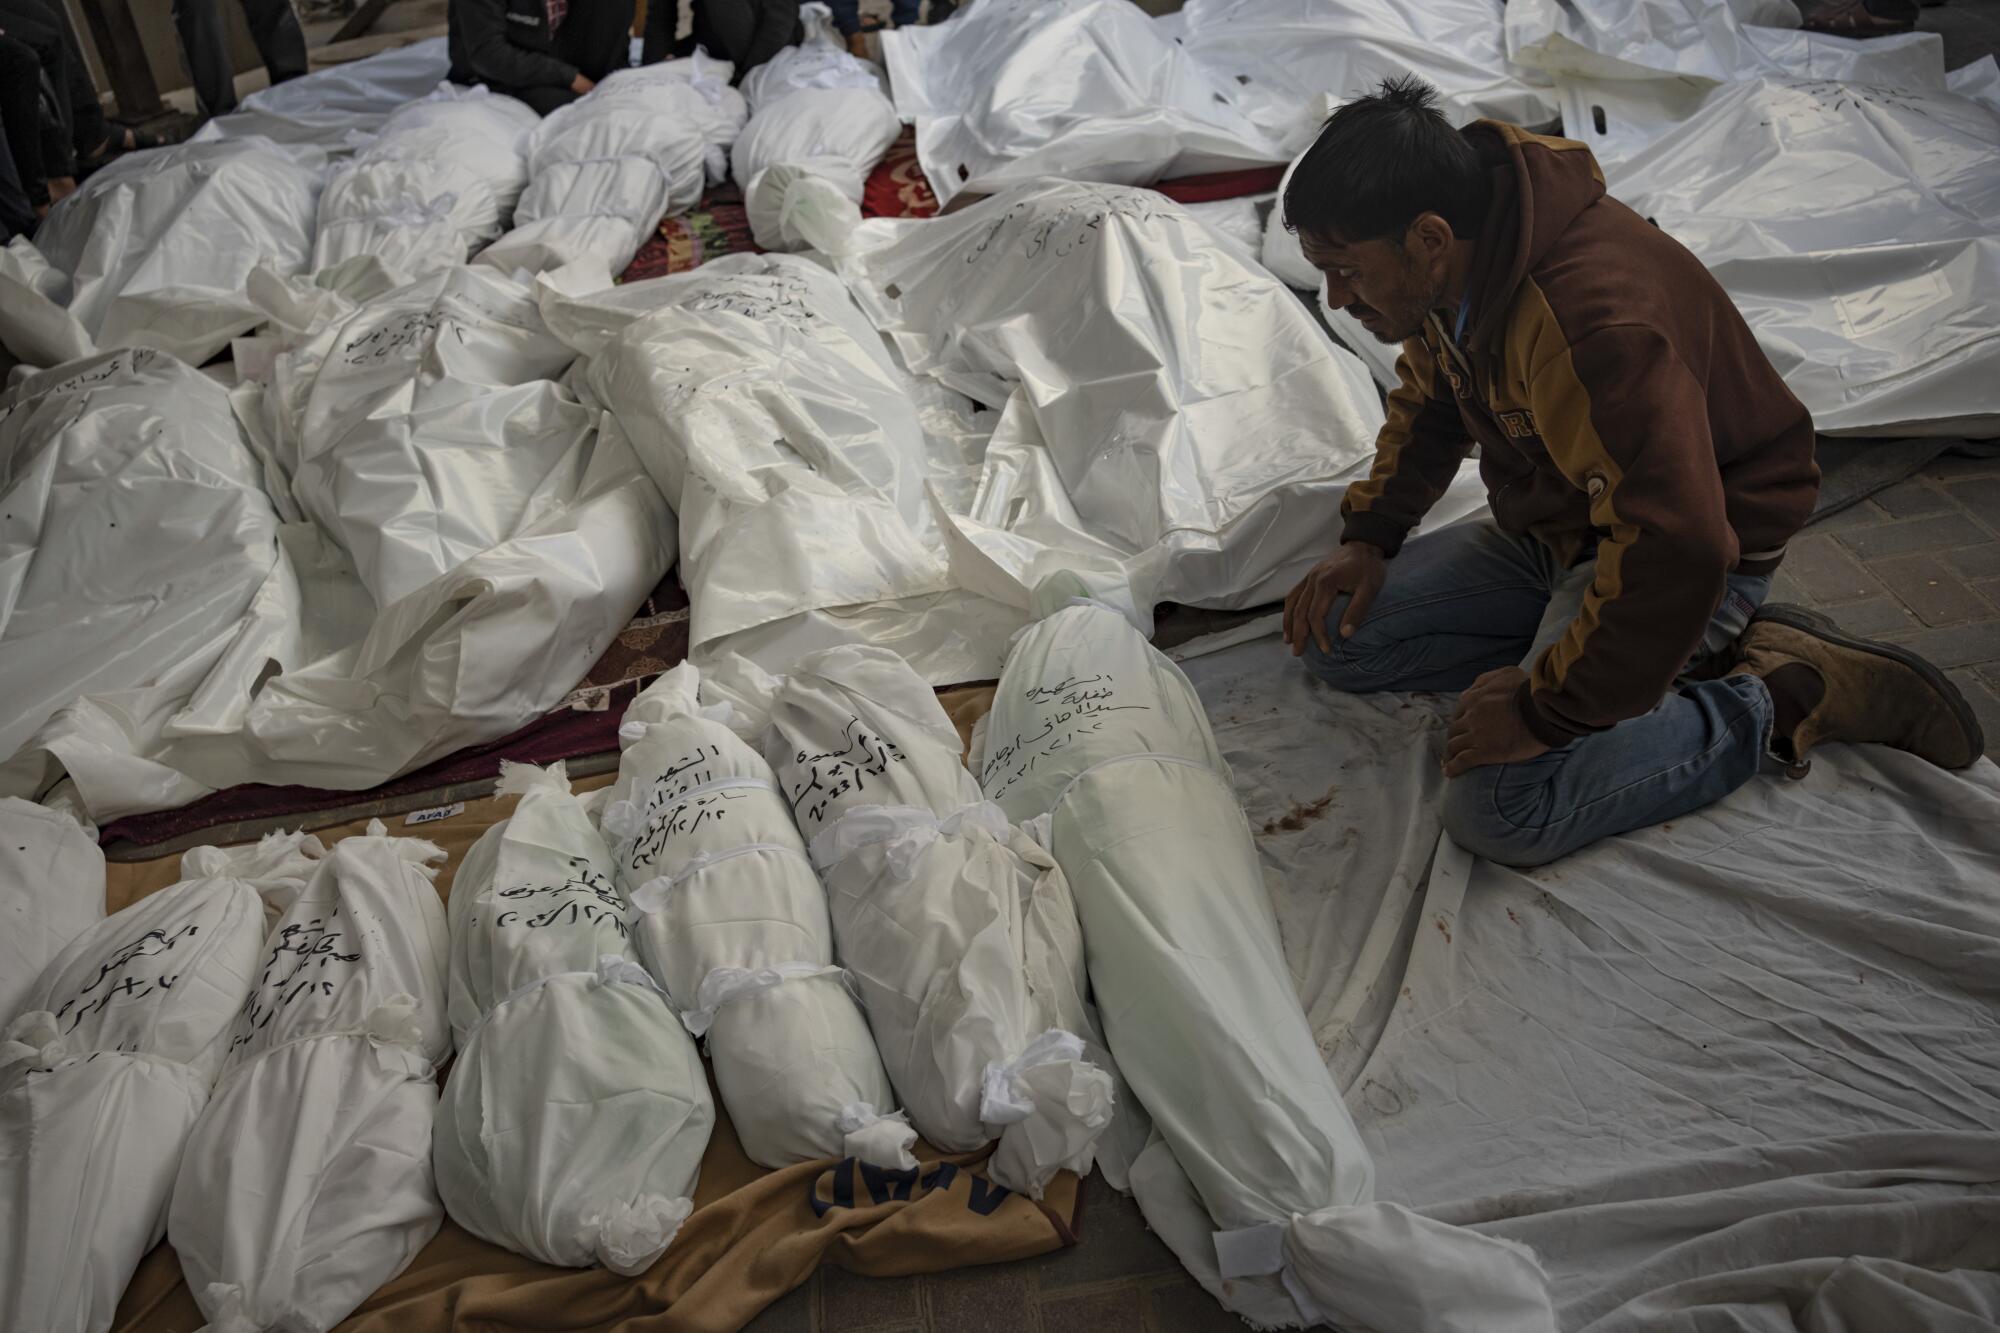 A man kneels by rows of shrouded bodies in Gaza.